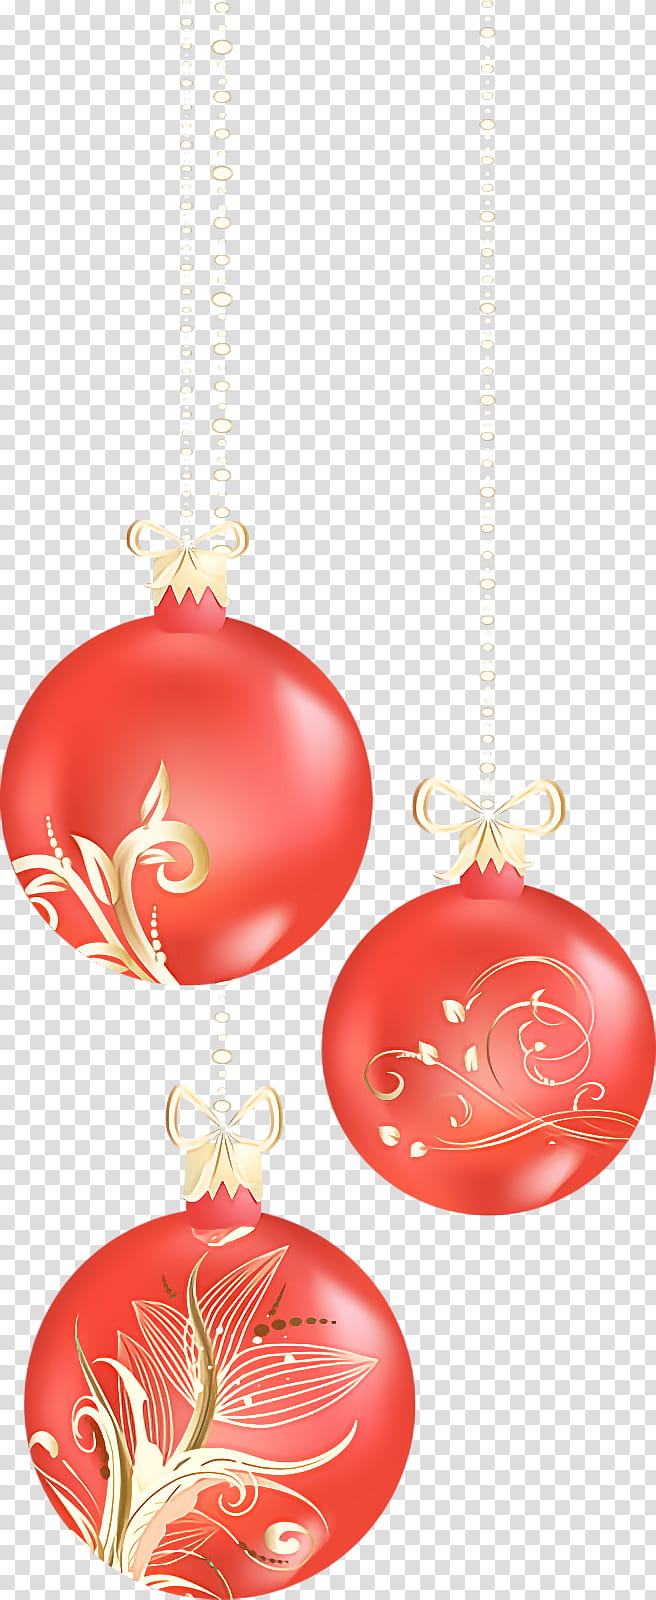 Christmas Bulbs Christmas Balls Christmas bubbles, Christmas Ornaments, Holiday Ornament, Red, Christmas Decoration, Christmas , Sphere, Interior Design transparent background PNG clipart